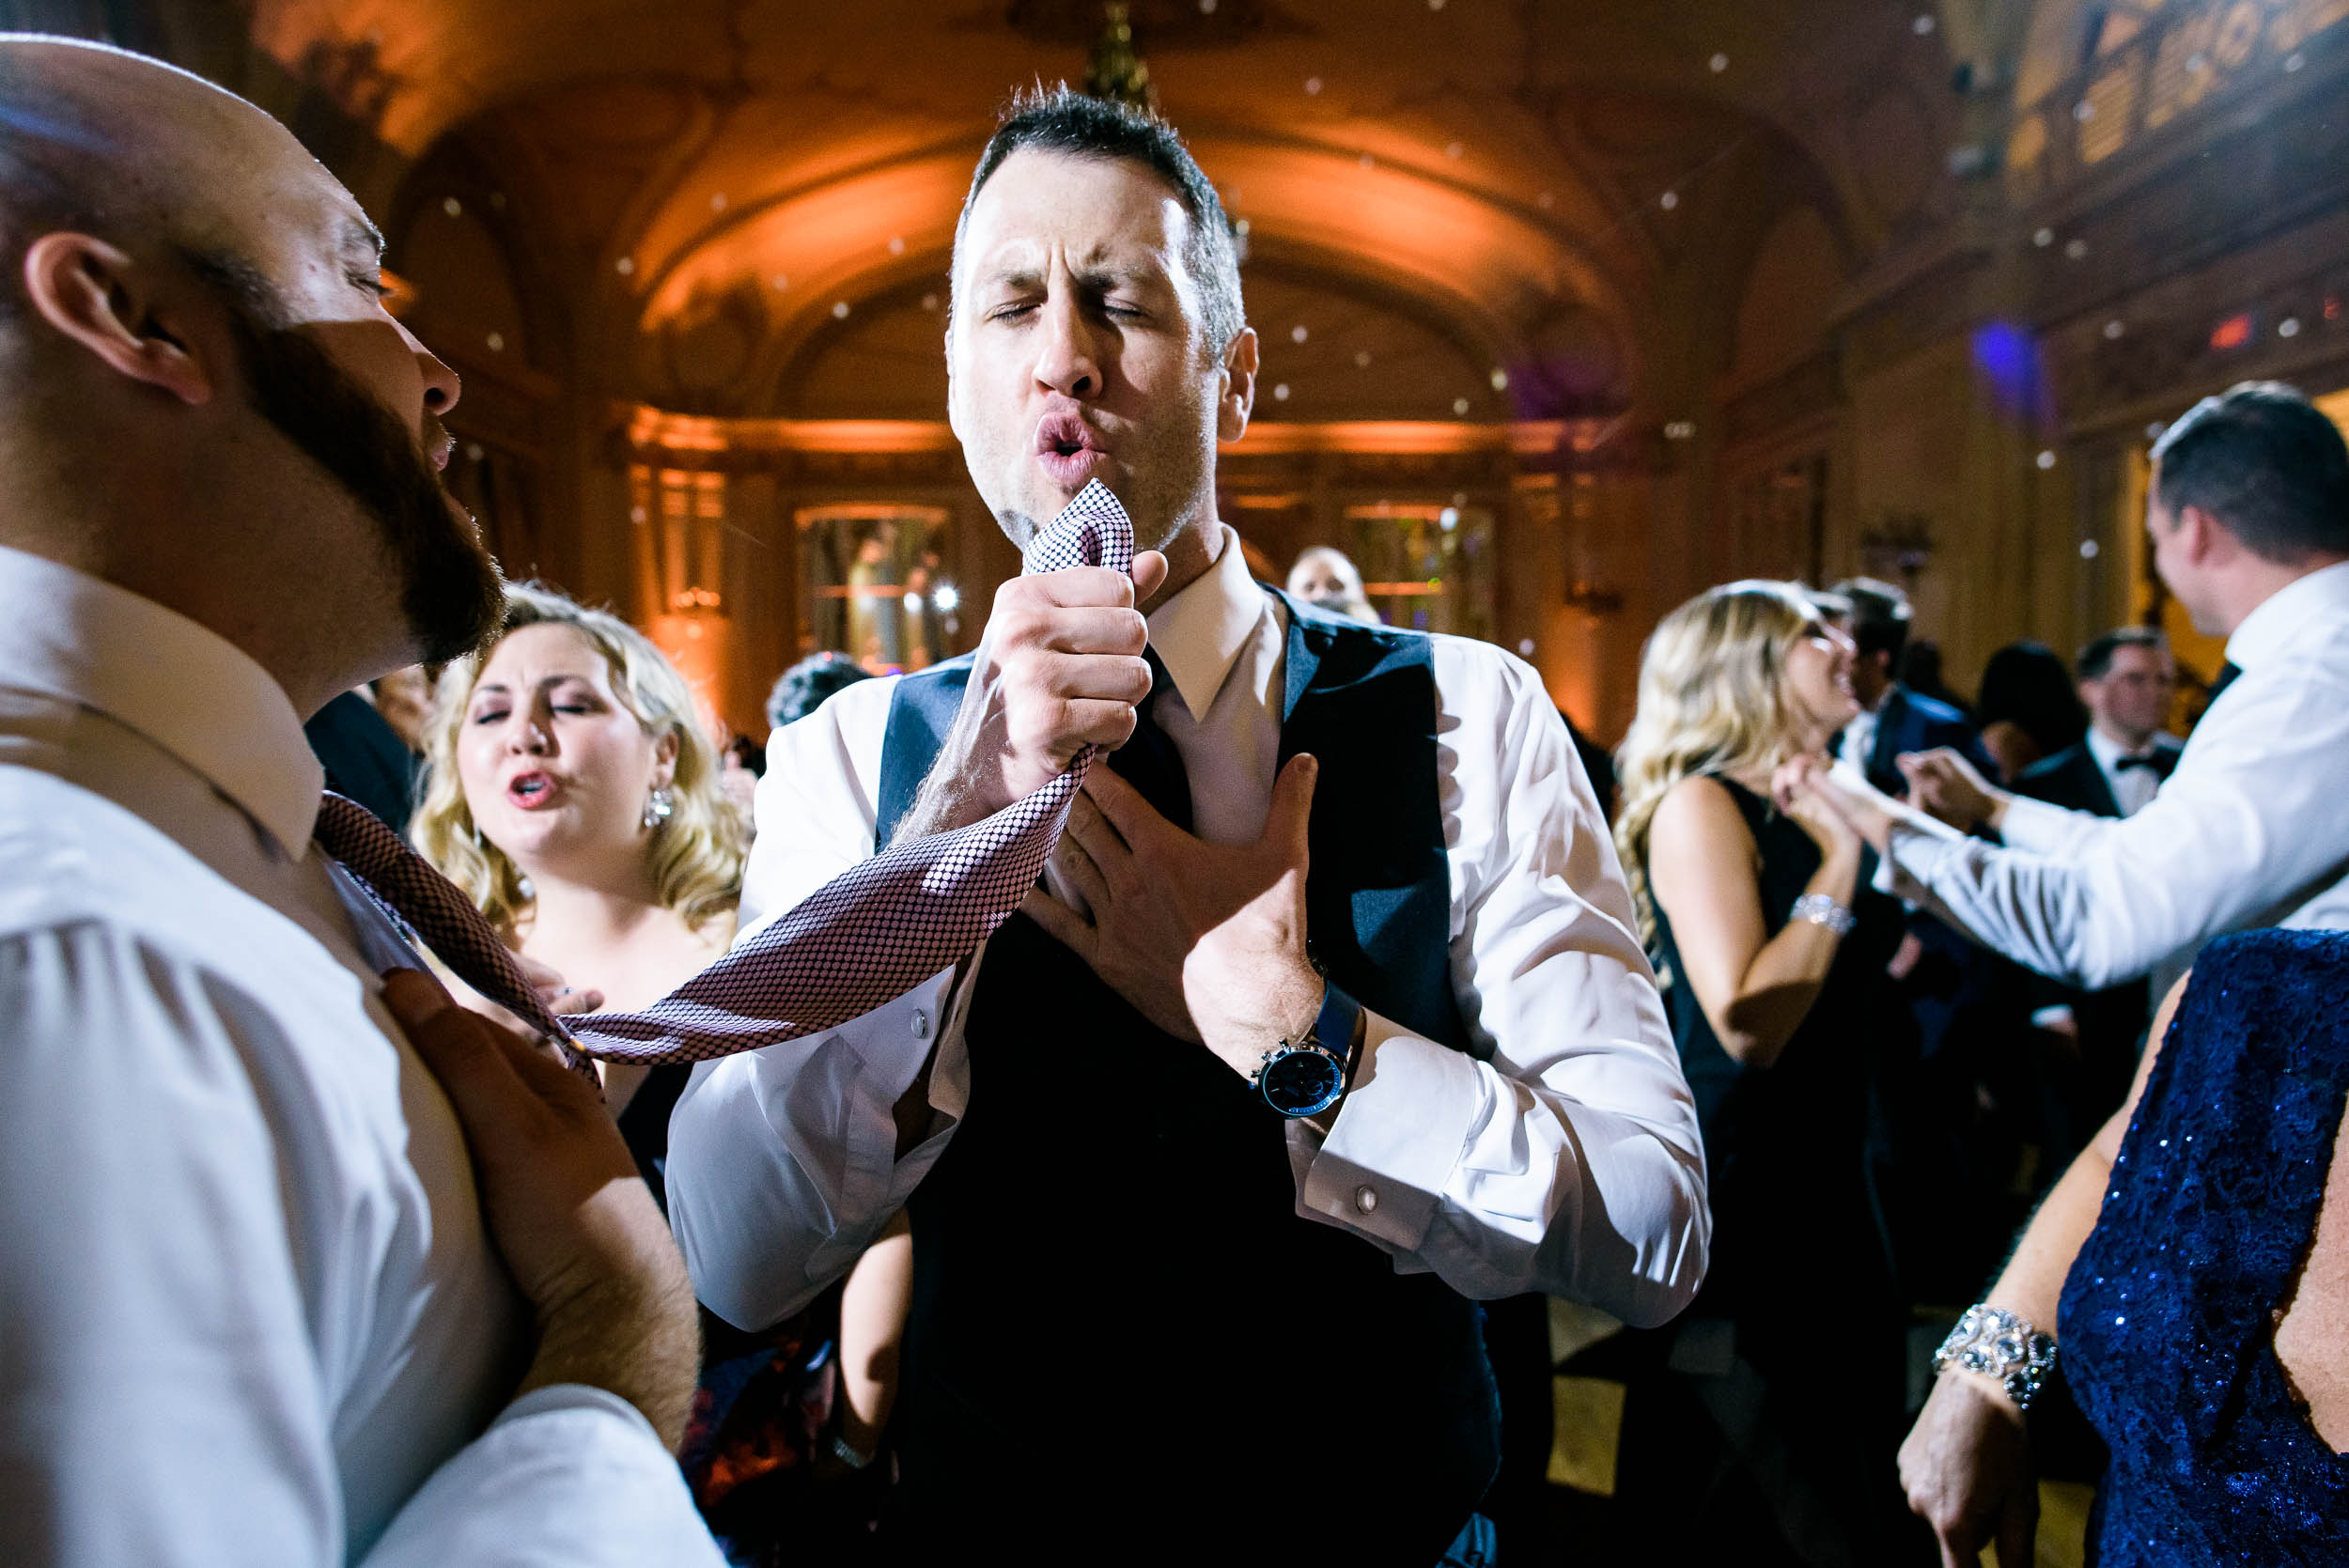 Wedding reception fun at luxurious fall wedding at the Chicago Symphony Center captured by J. Brown Photography. See more wedding ideas at jbrownphotography.com!